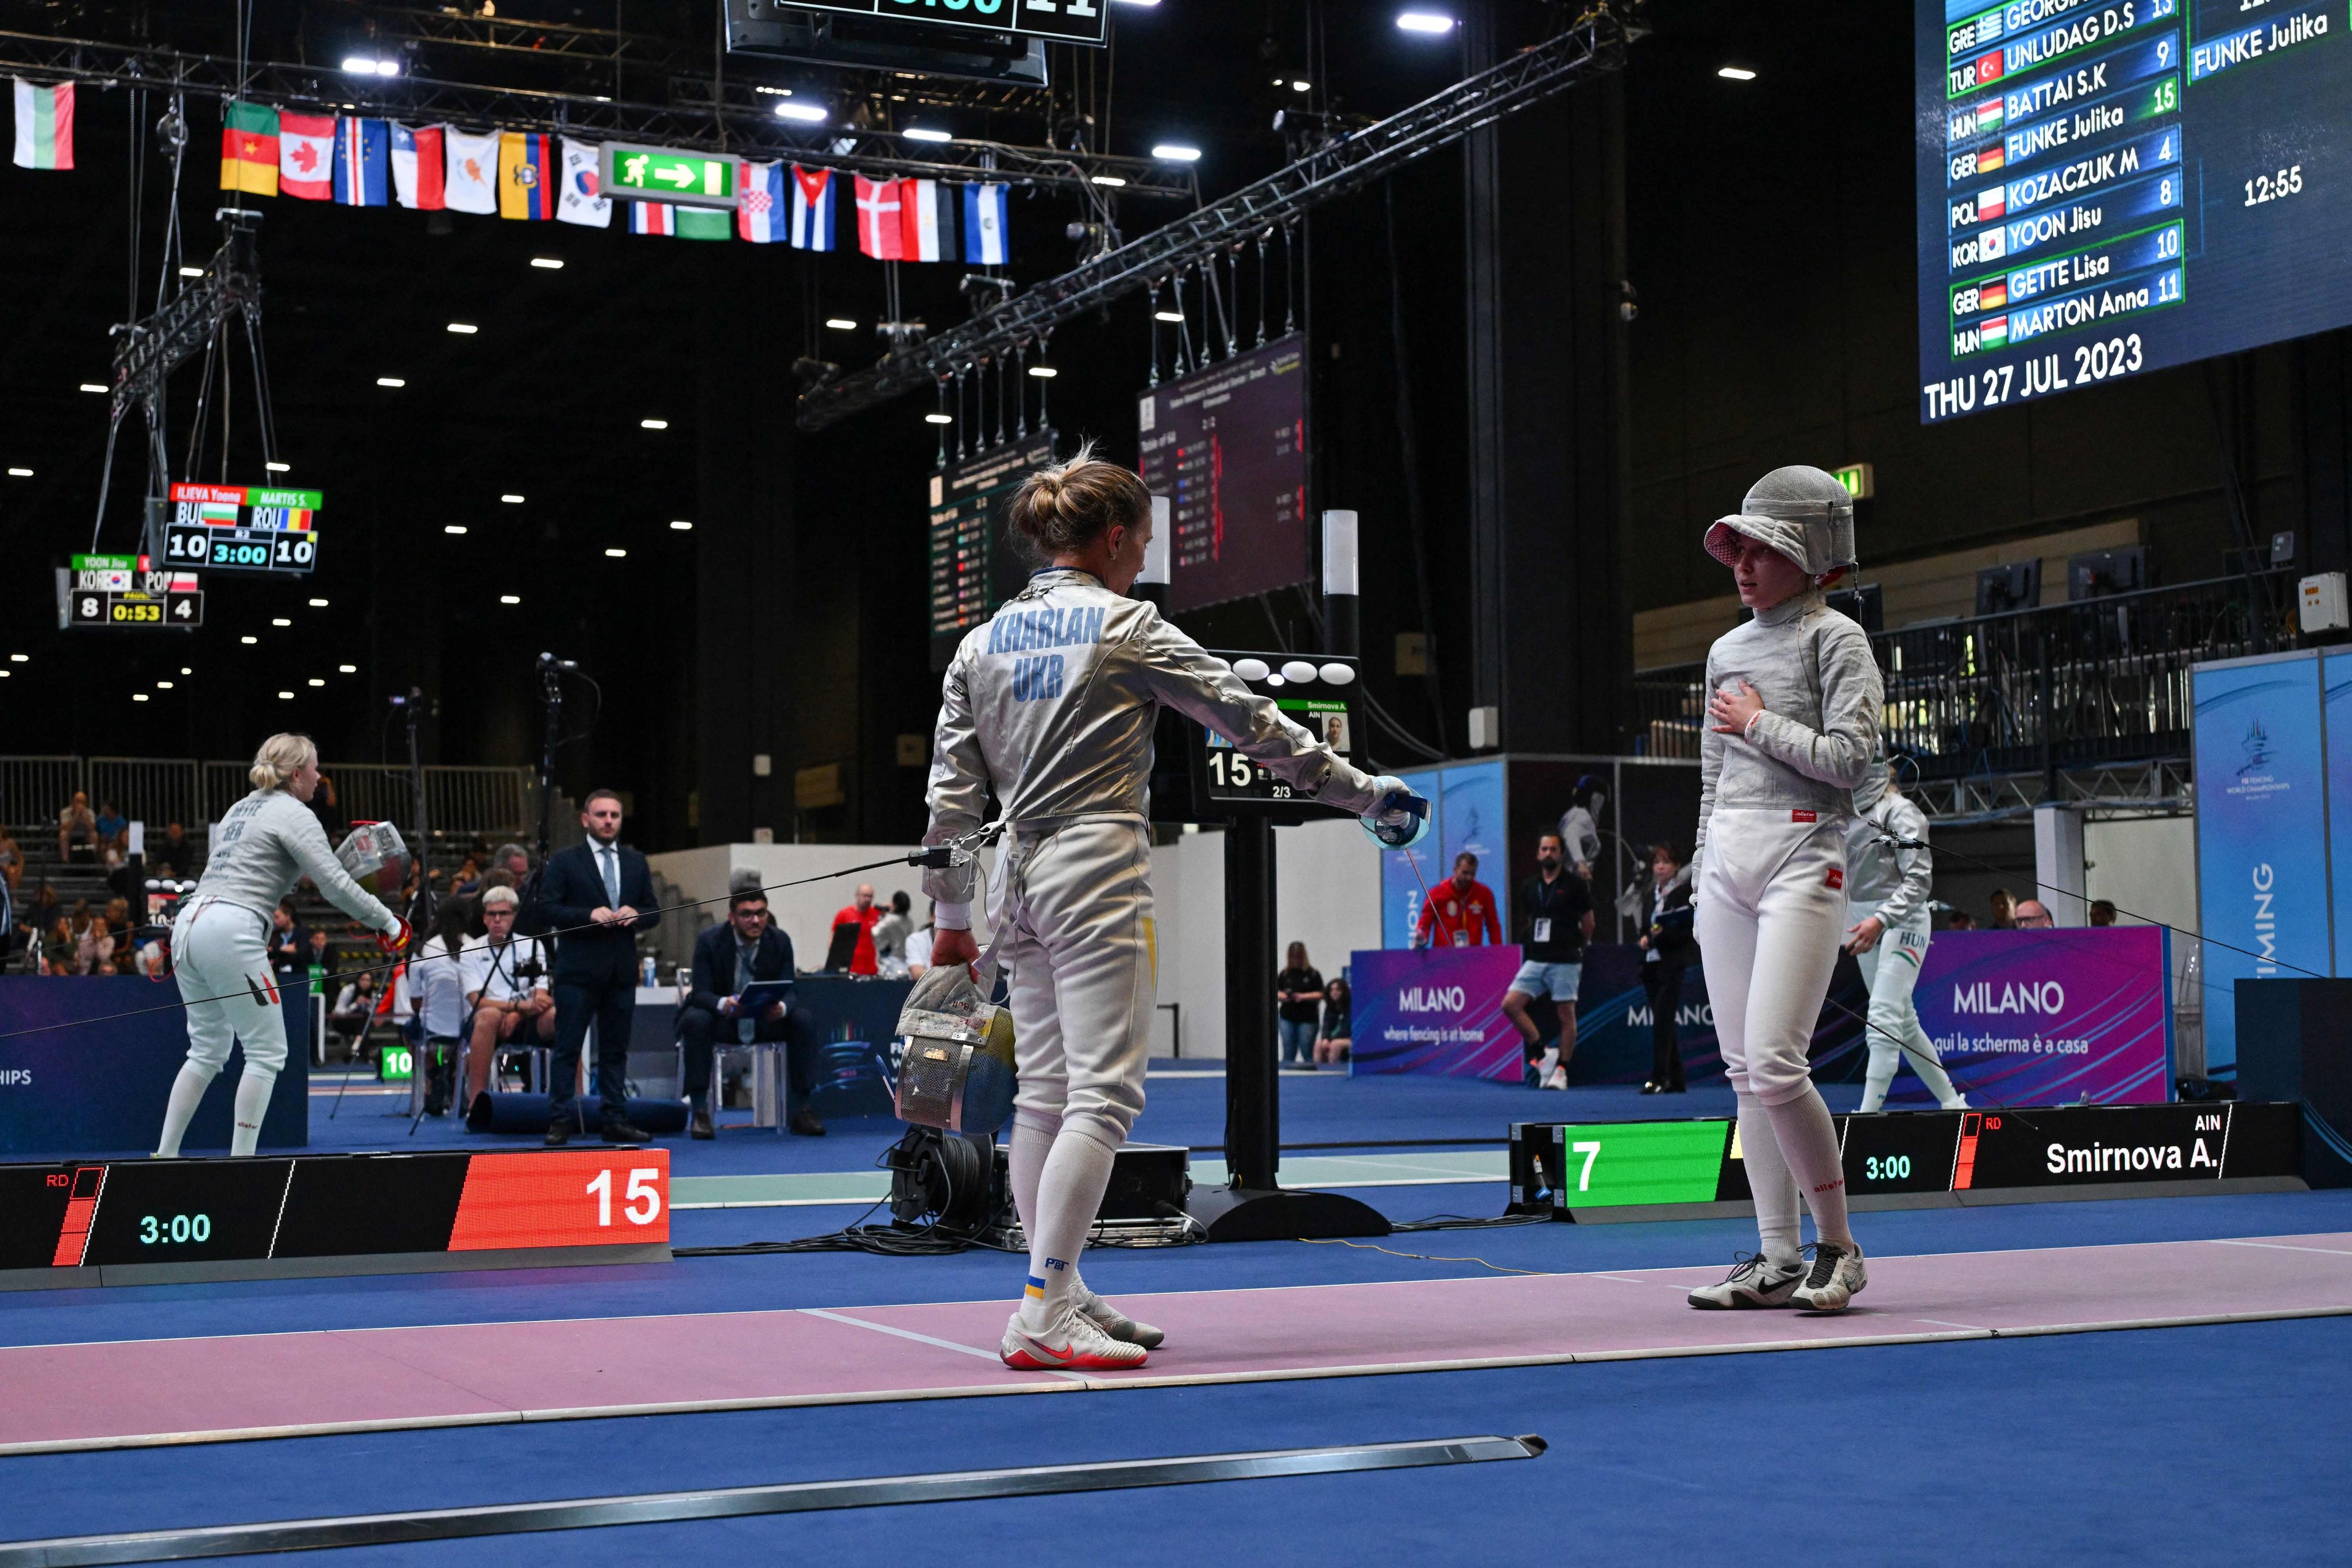 Ukraine’s Olga Kharlan (left) gestures as she refuses to shake hands with Russia’s Anna Smirnova at the FIE Fencing World Championships in Milan. Photo: AFP